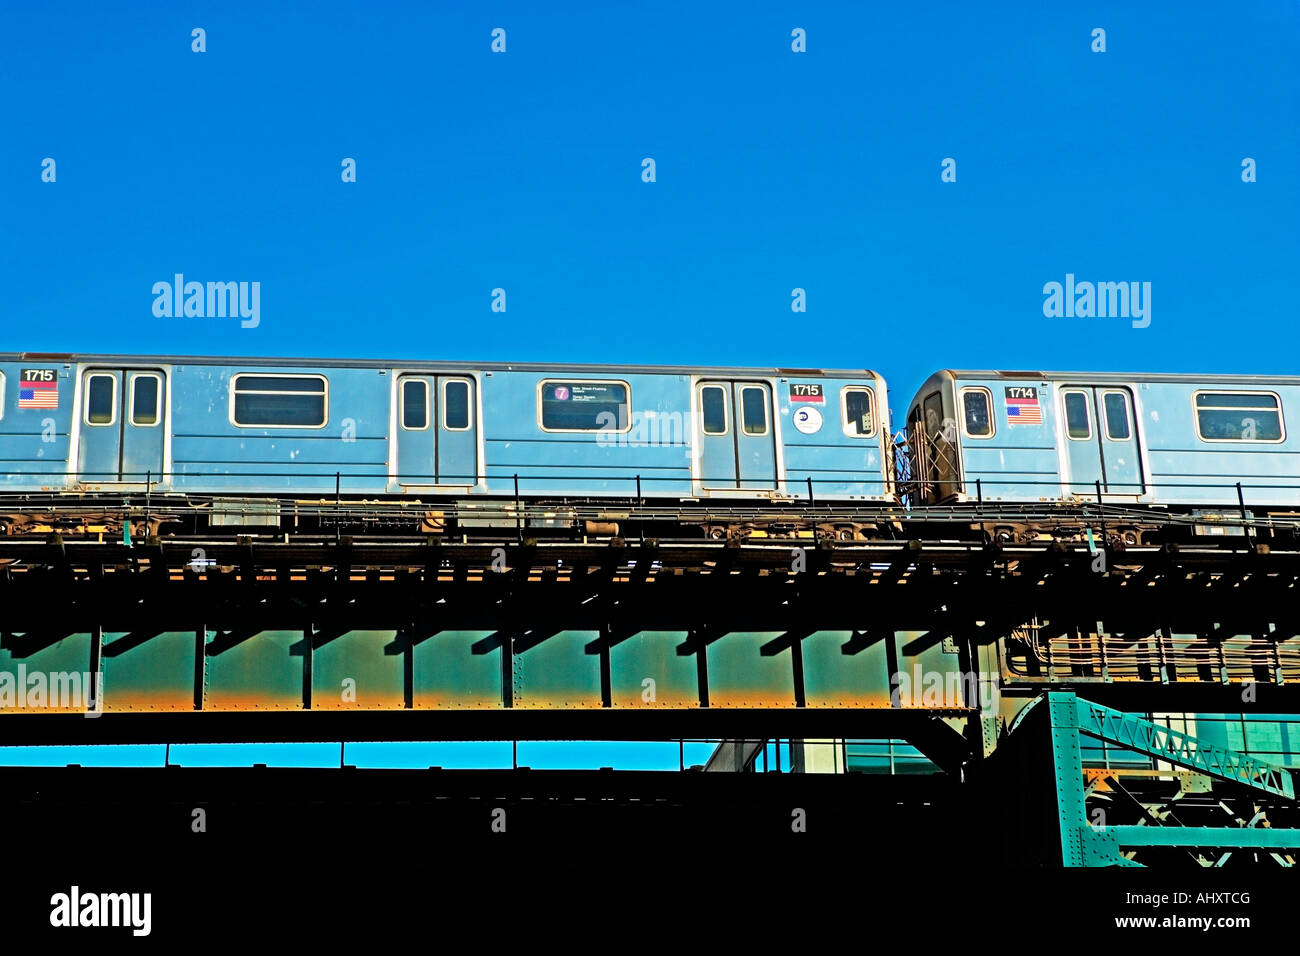 Elevated train under blue sky Stock Photo